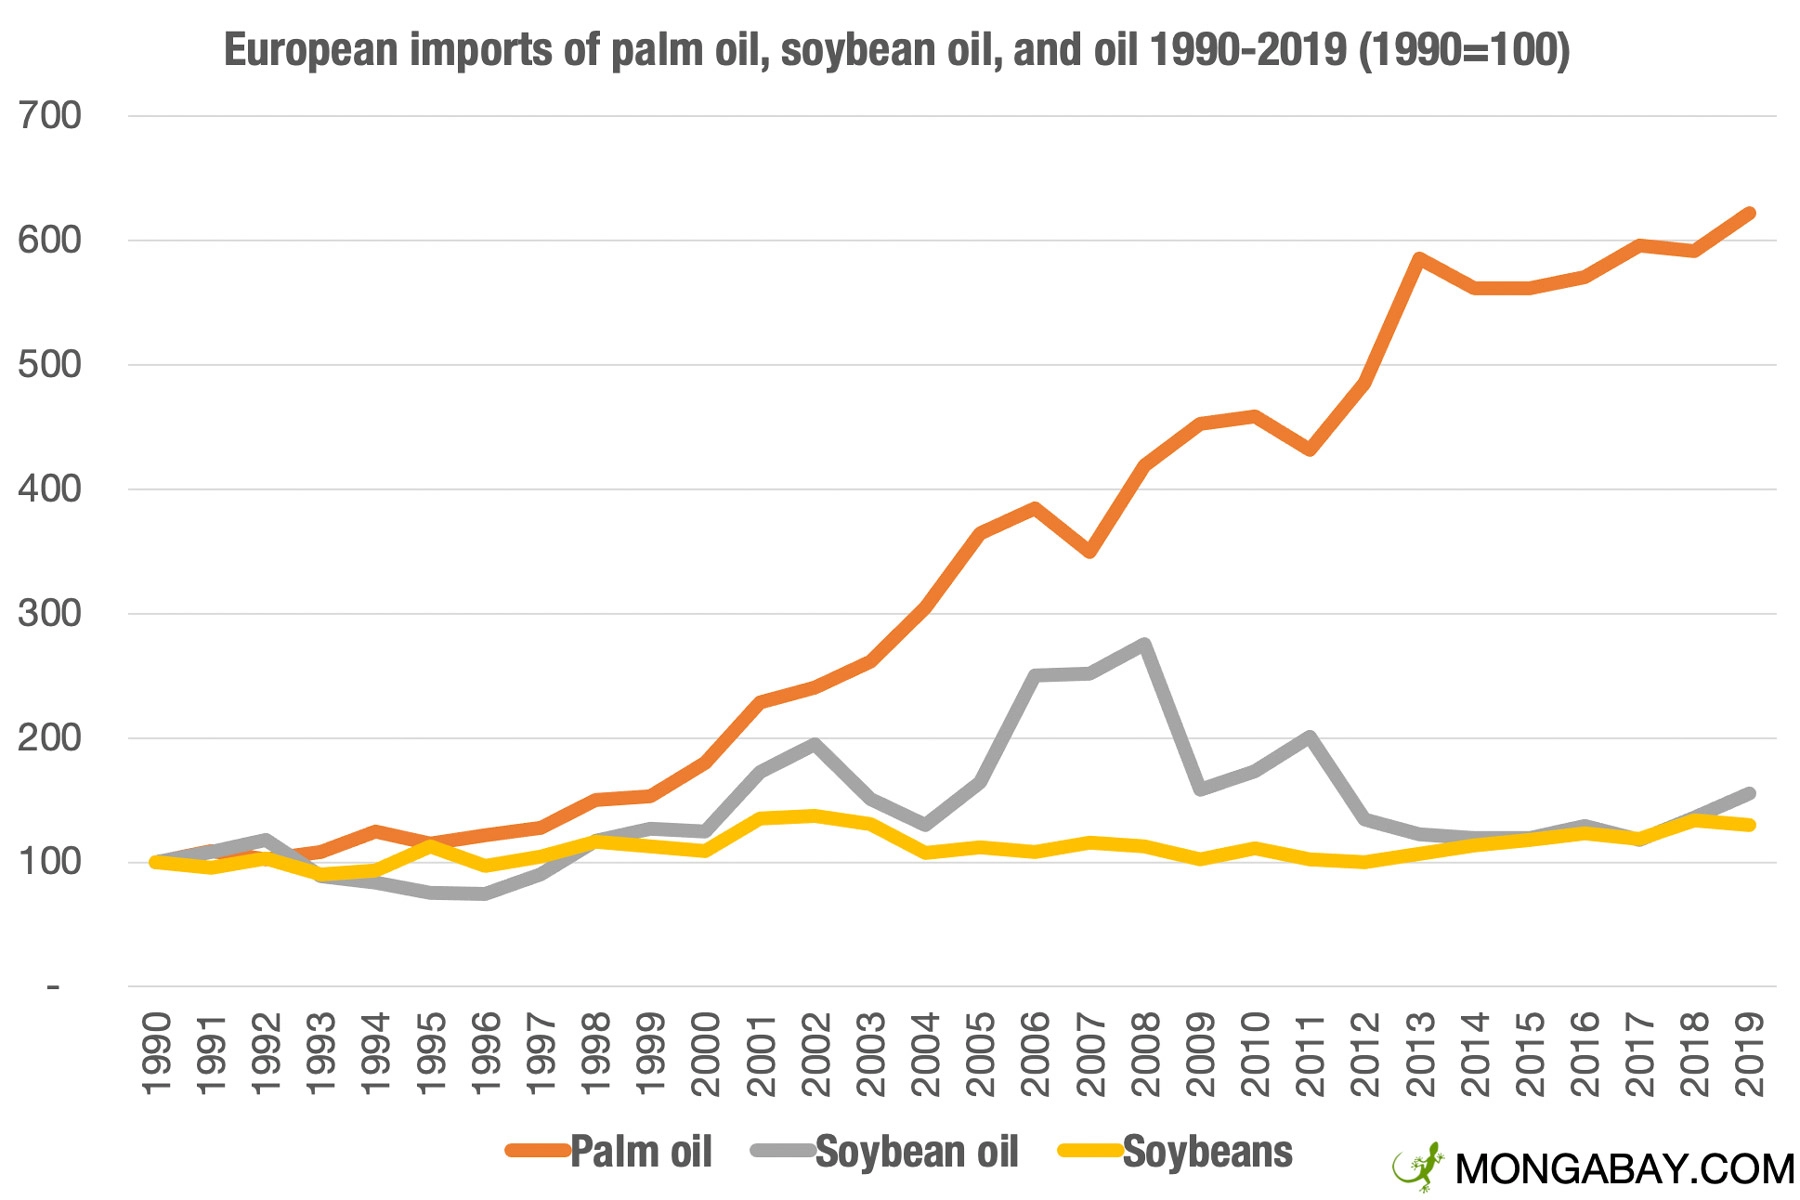 Graph of palm oil and soy imports into Europe